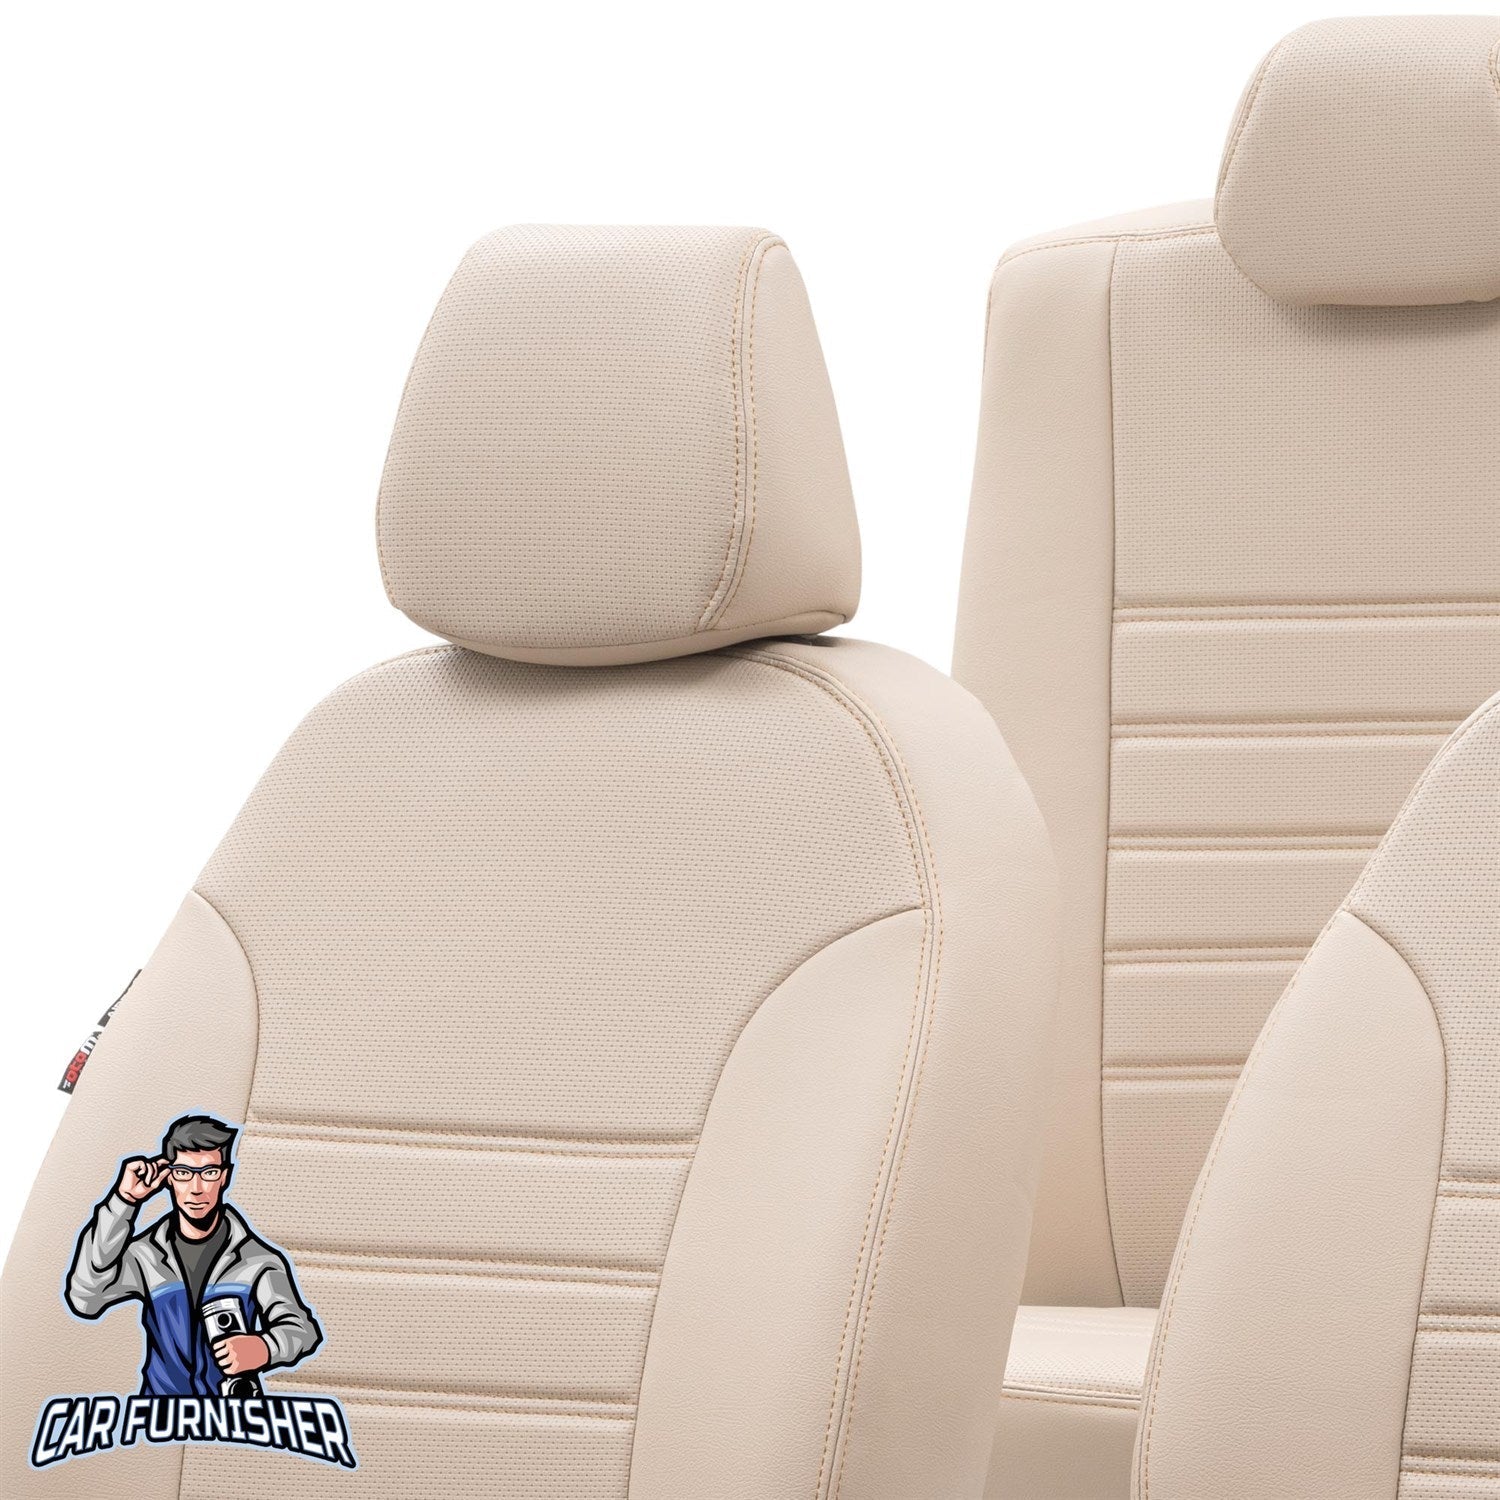 Ford Cargo Seat Cover New York Leather Design Beige Leather